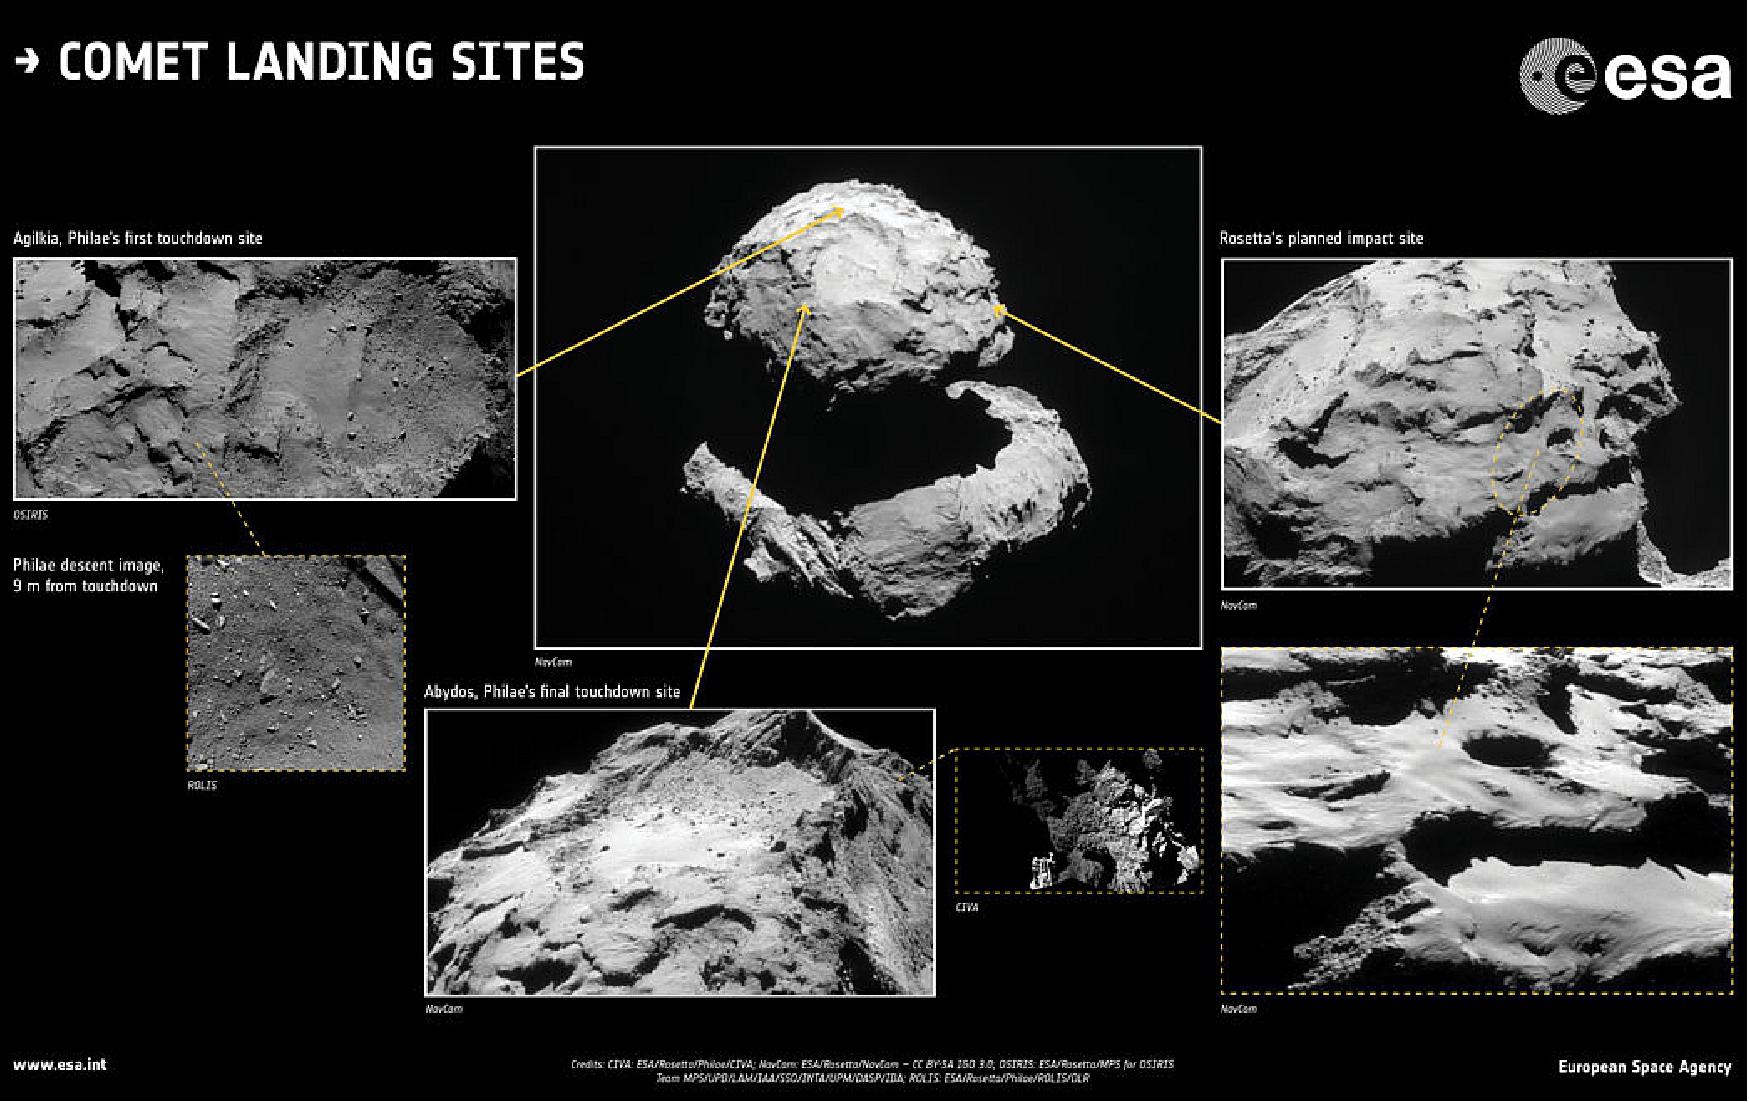 Figure 91: Comet landing sites in context: Rosetta's planned impact point in Ma'at shown in context with Philae's first and final touchdown sites. All three sites are on the smaller of Comet 67P/Churyumov–Gerasimenko's two lobes (image credit: CIVA: ESA/Rosetta/Philae/CIVA; NAVCAM: ESA/Rosetta/NAVCAM – CC BY-SA IGO 3.0; OSIRIS: ESA/Rosetta/MPS for OSIRIS Team MPS/UPD/LAM/IAA/SSO/INTA/UPM/DASP/IDA; ROLIS: ESA/Rosetta/Philae/ROLIS/DLR) 120)